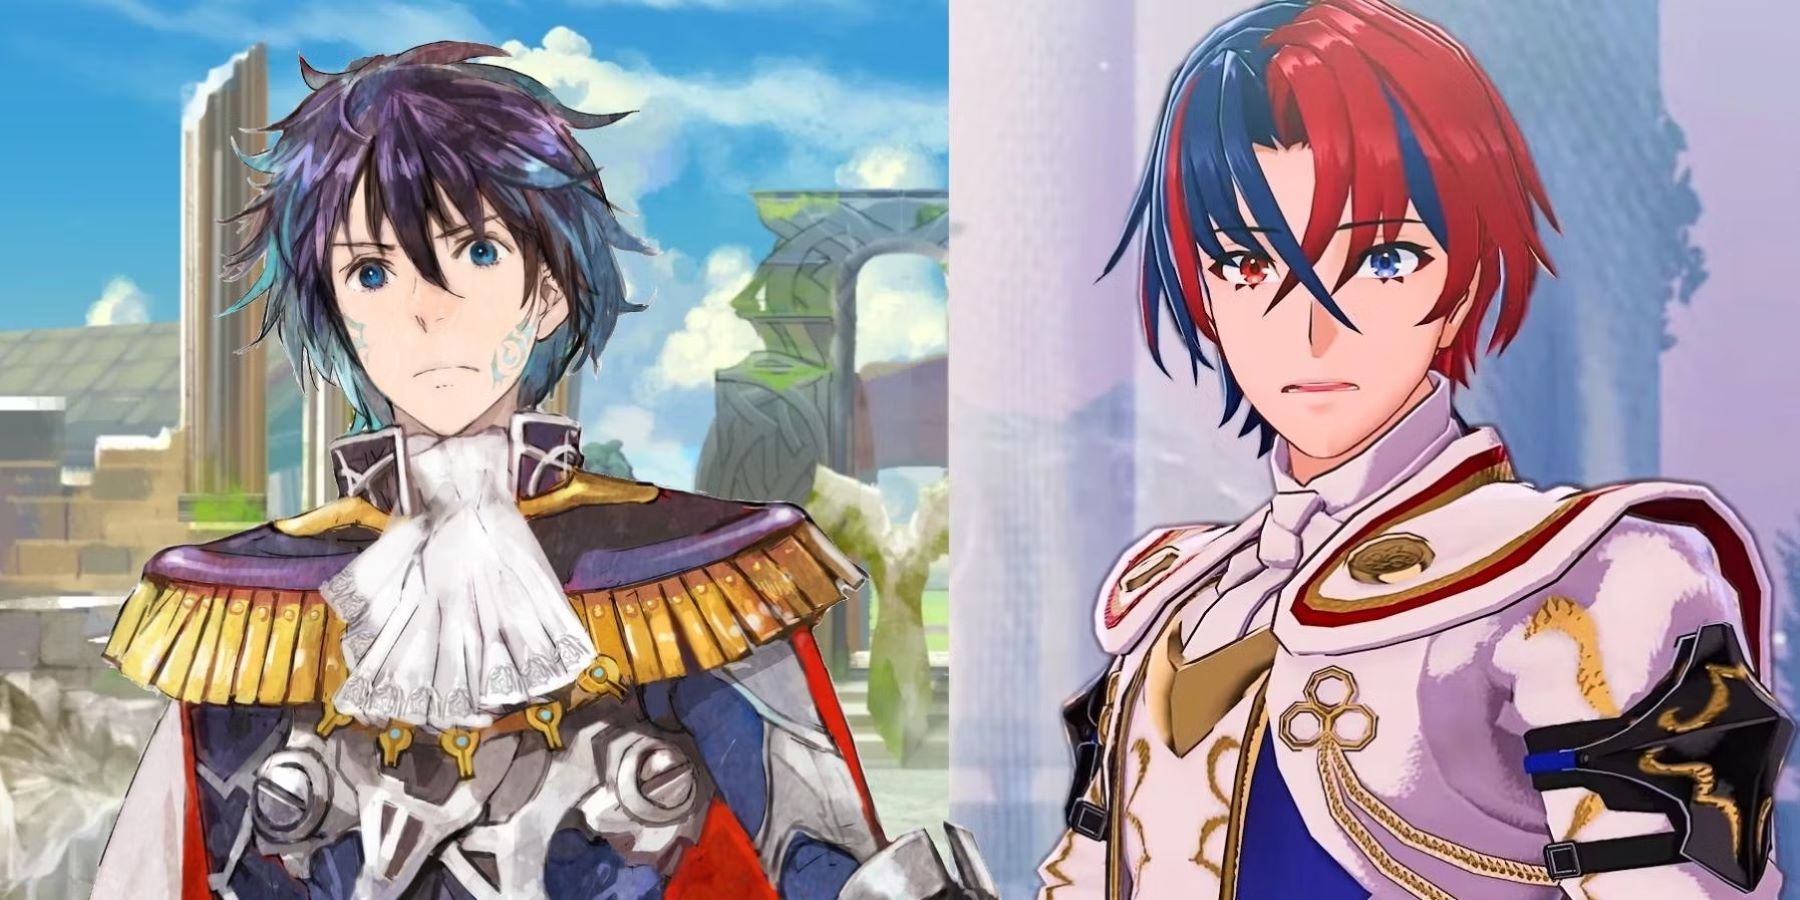 Characters from Fire Emblem Engage and Tokyo Mirage Session #FE together